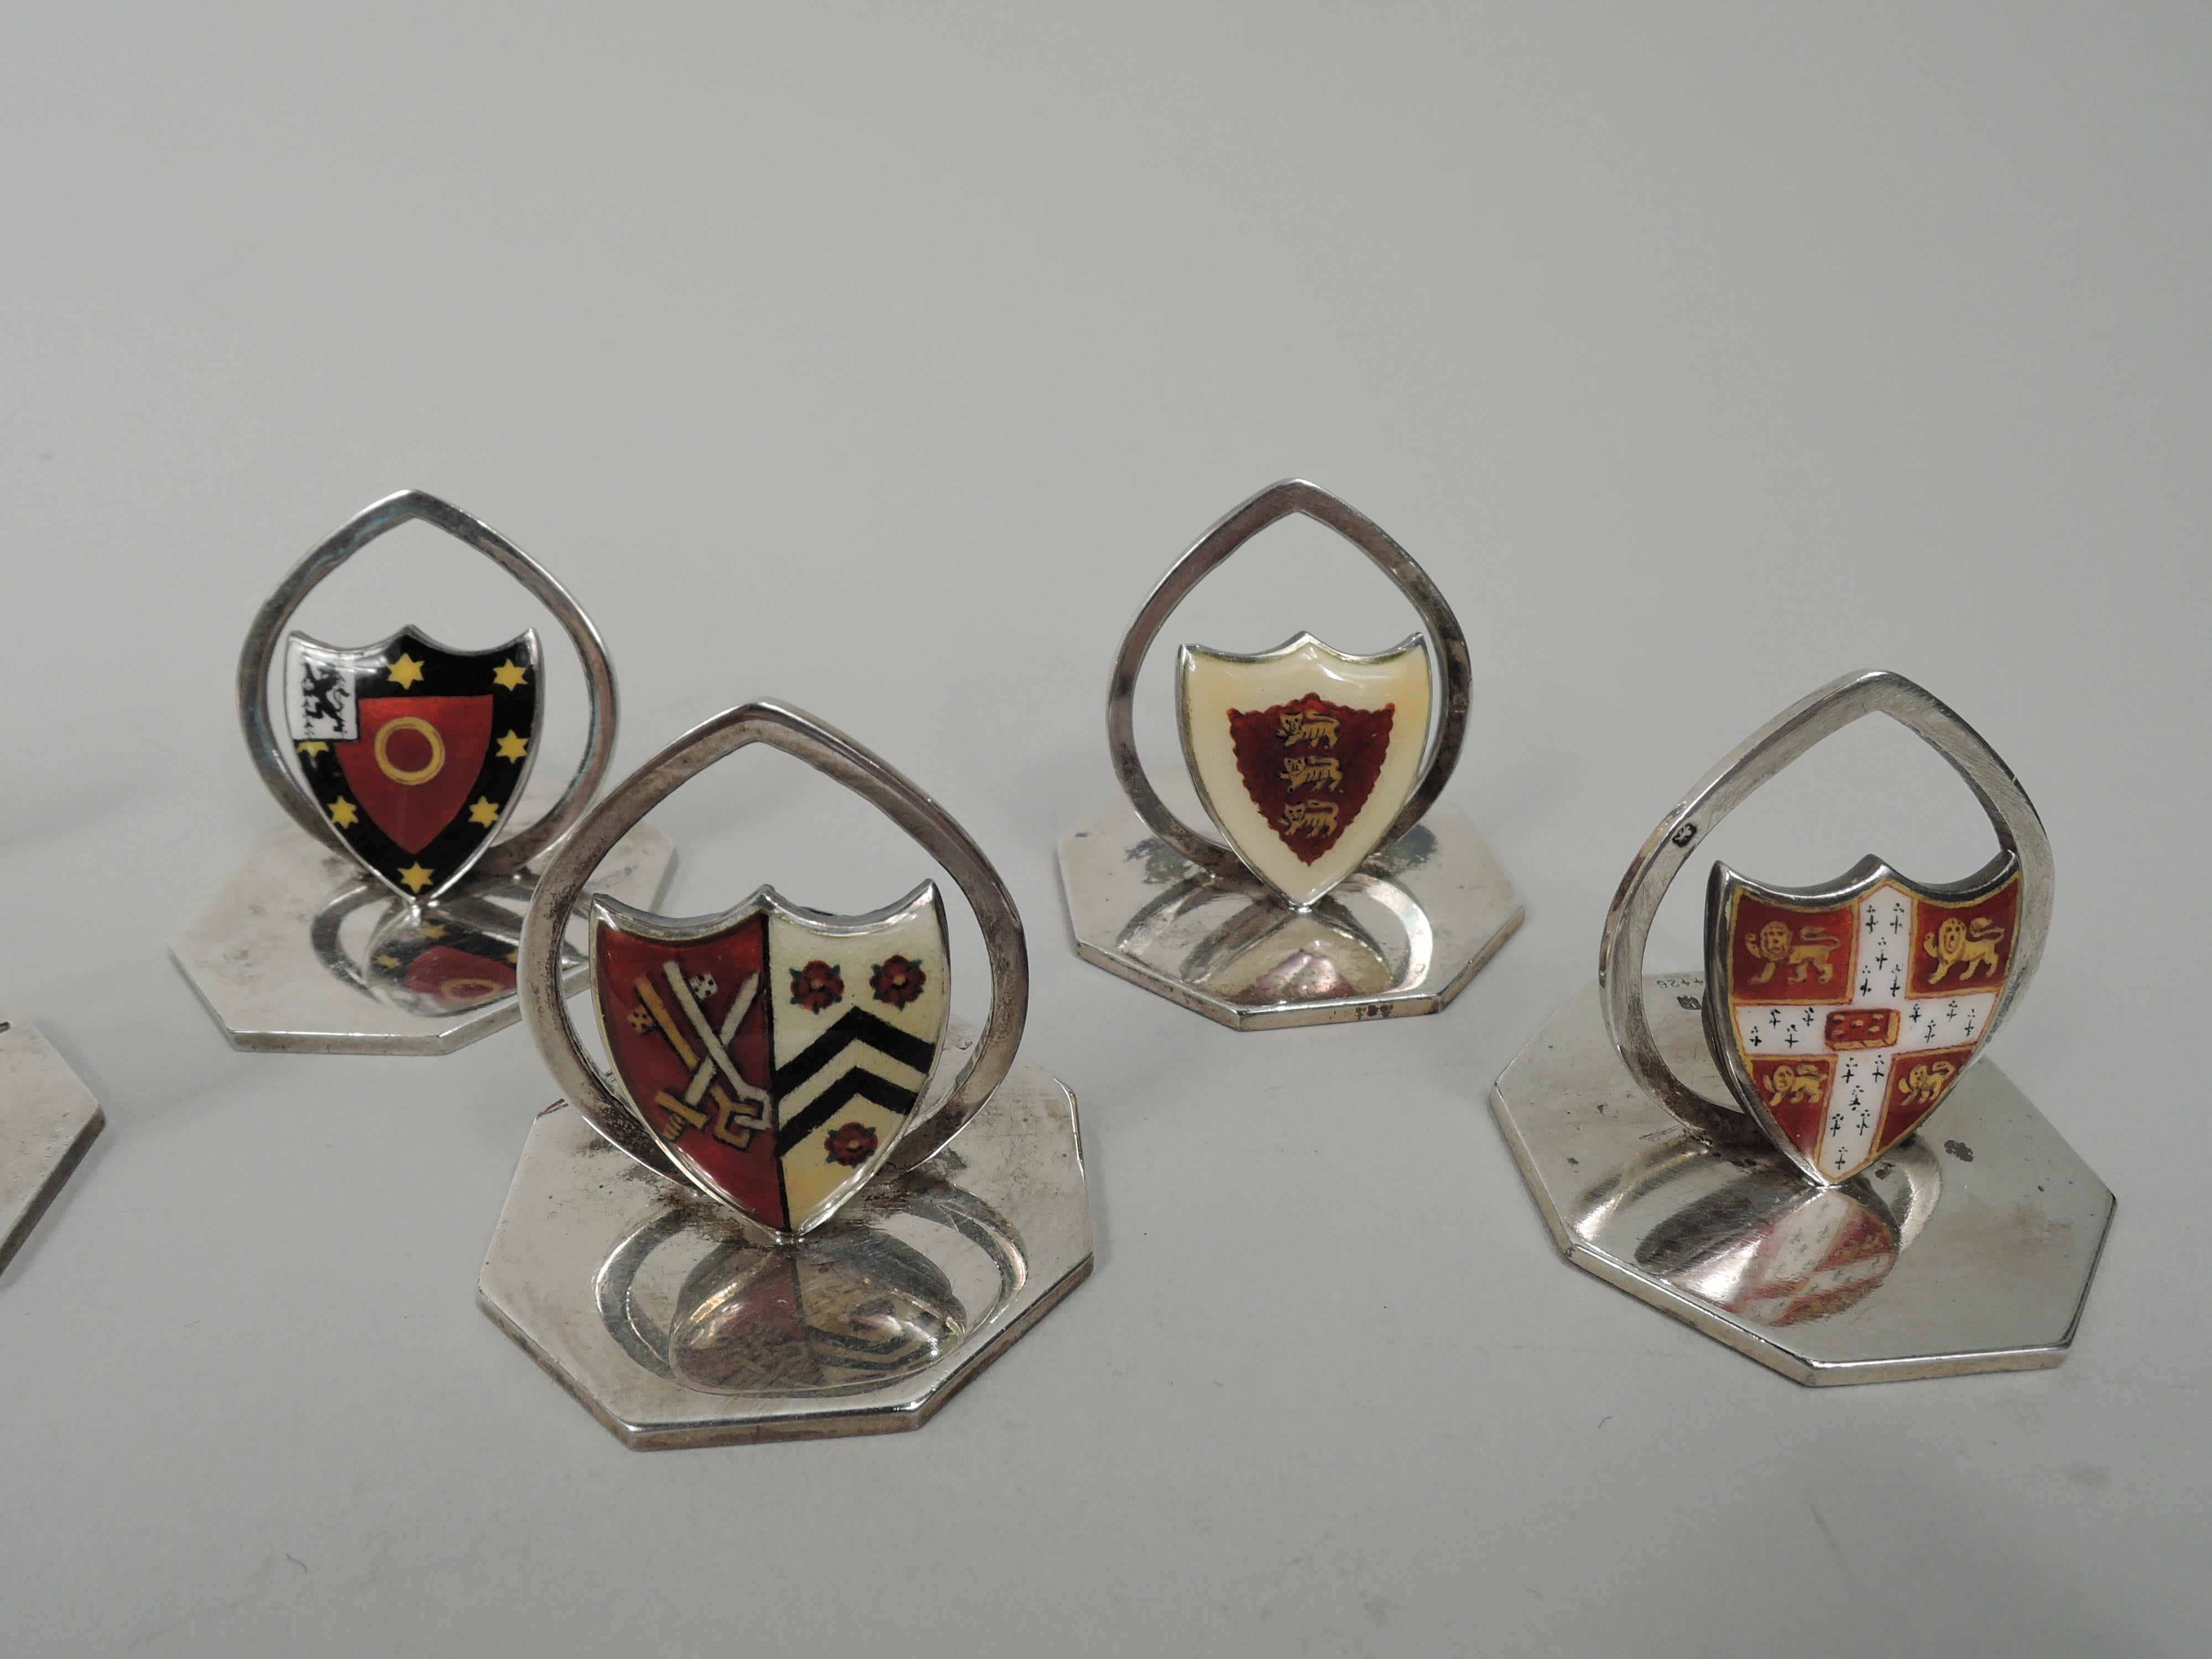 Edwardian Set of 8 English Enamel Ennobling Armorial Place Card Holders For Sale